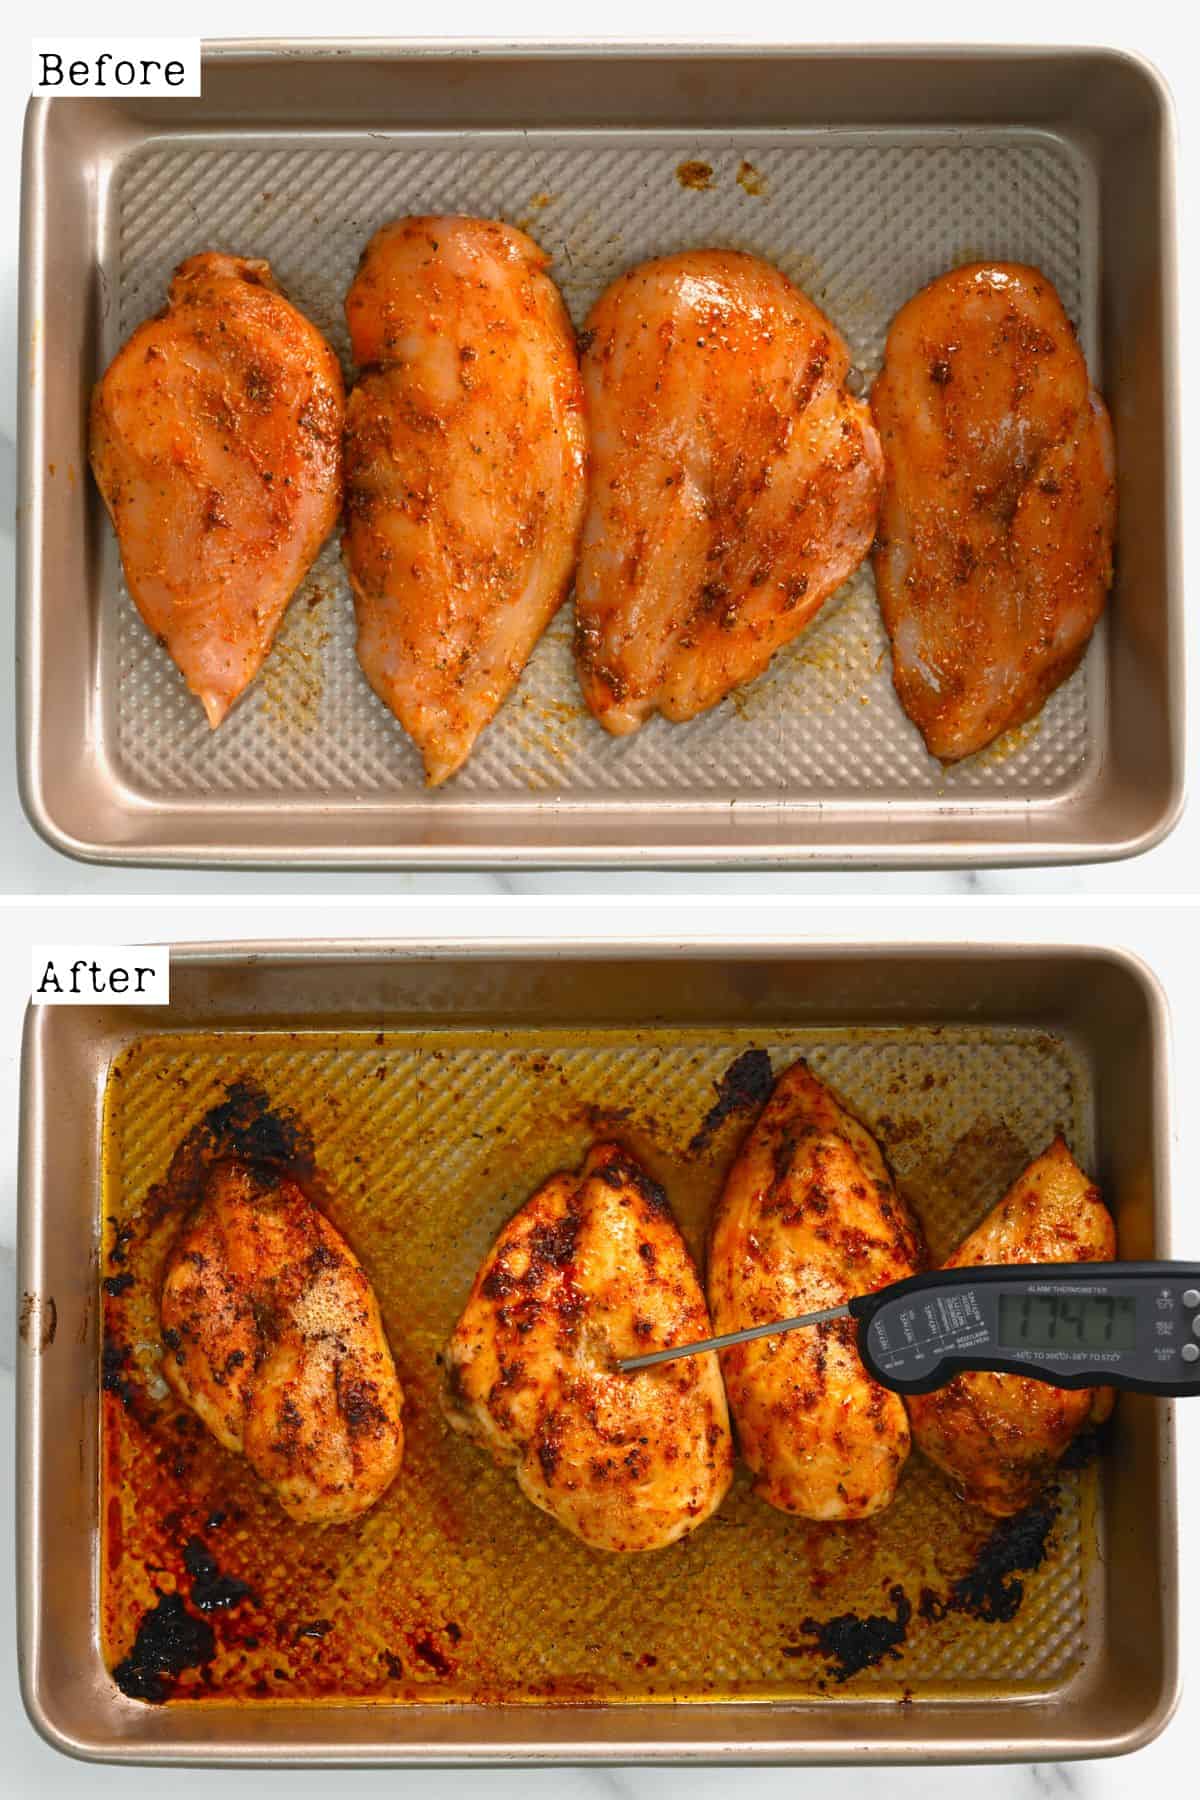 Before and after baking chicken in the oven